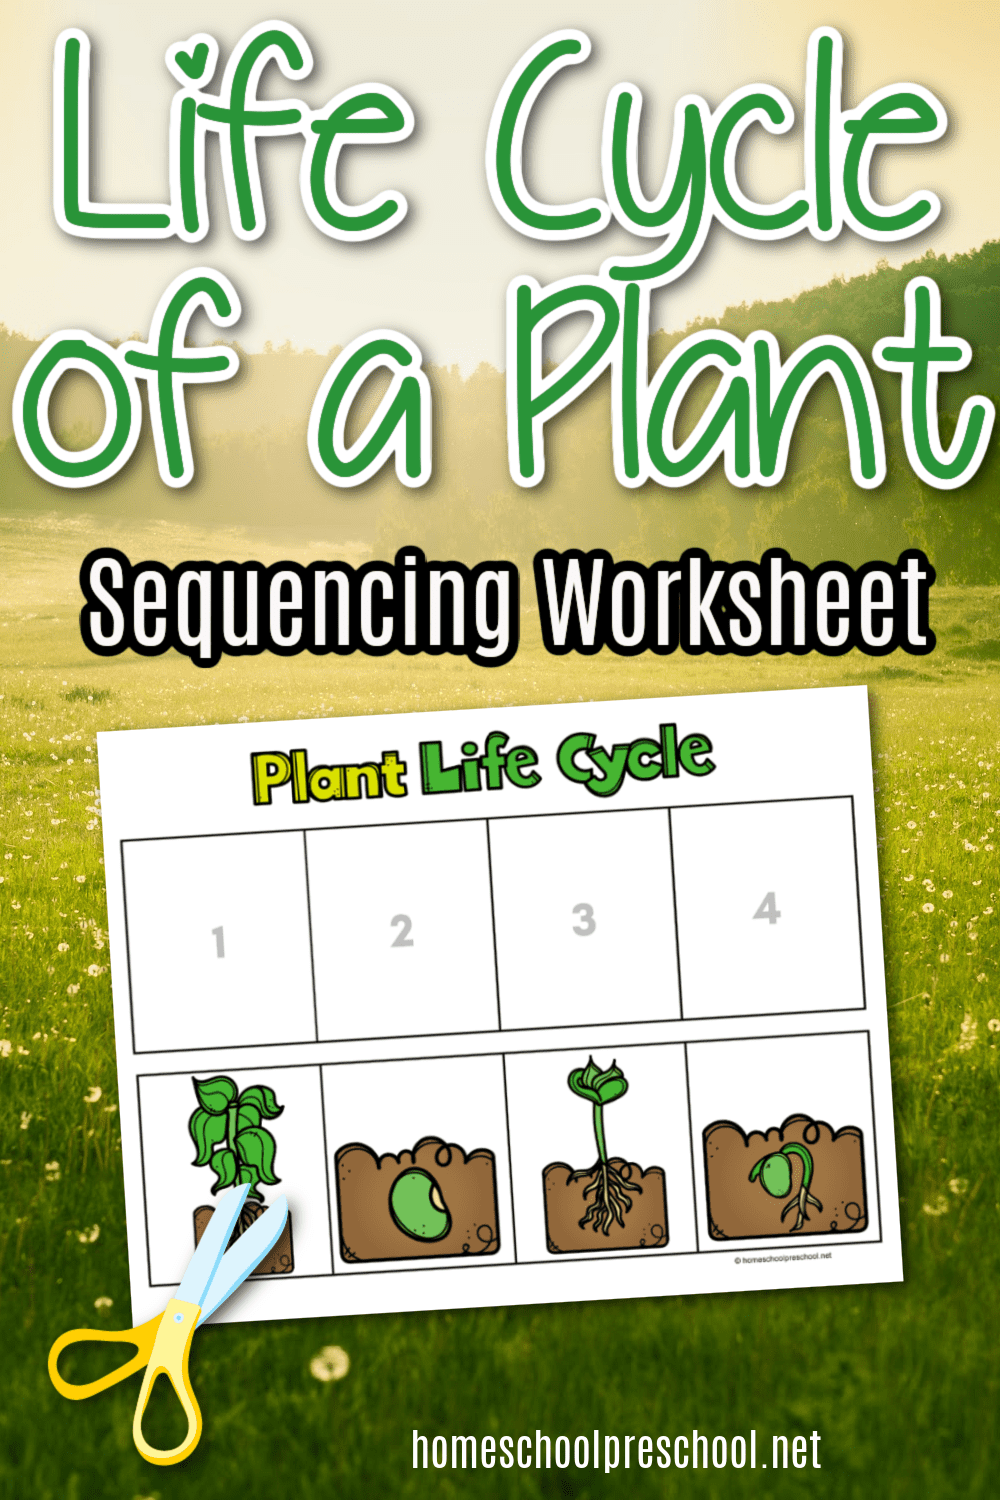 life-cycle-of-a-plant-wksht-1 Life Cycle of a Plant Worksheet